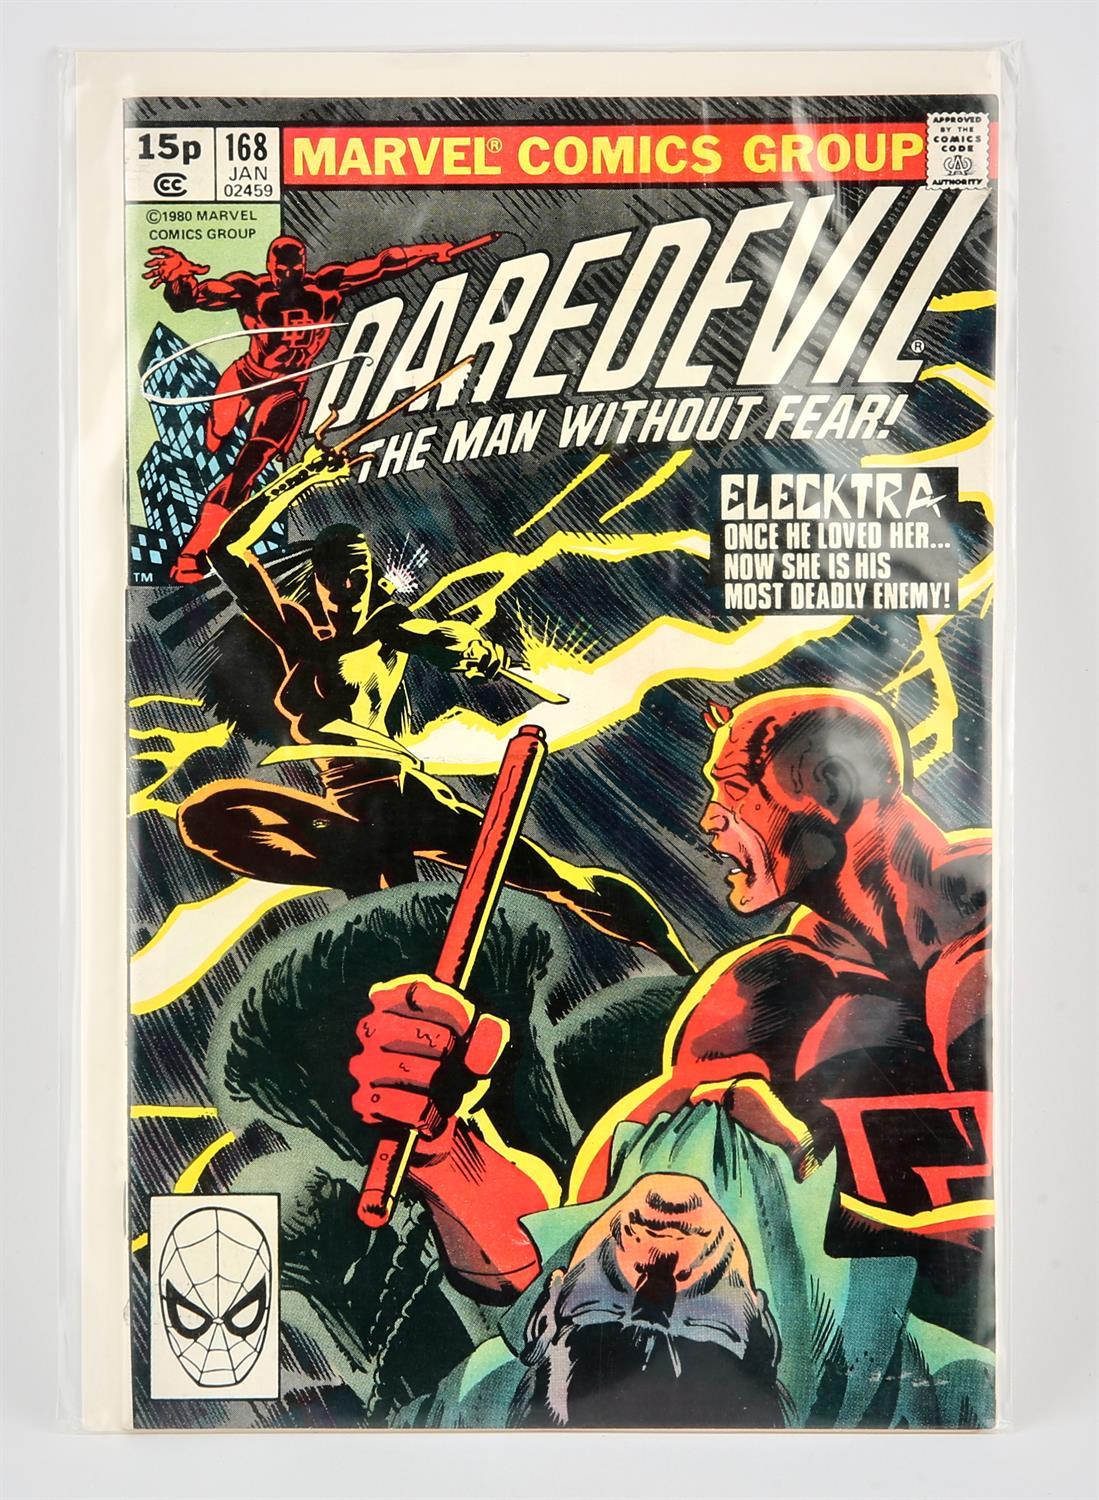 Marvel Comics: Daredevil No. 168 featuring the 1st appearance of Elektra (1980). Featuring the 1st